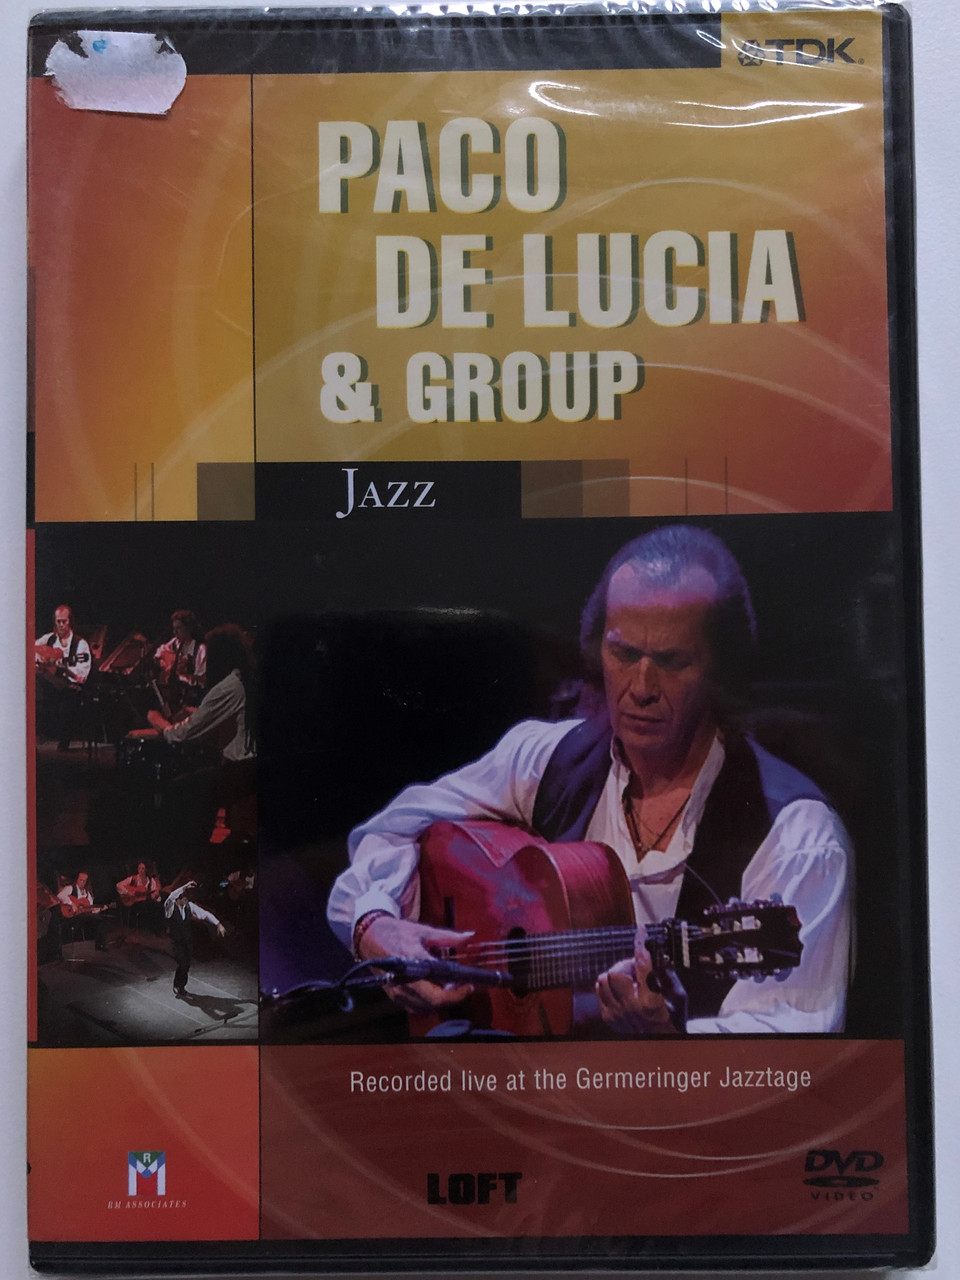 Paco de Lucia & Group DVD 2004 Jazz - Recorded live at the Germeringer  Jazztage / Directed by Dieter Hens / Loft production 1996 - Bible in My  Language